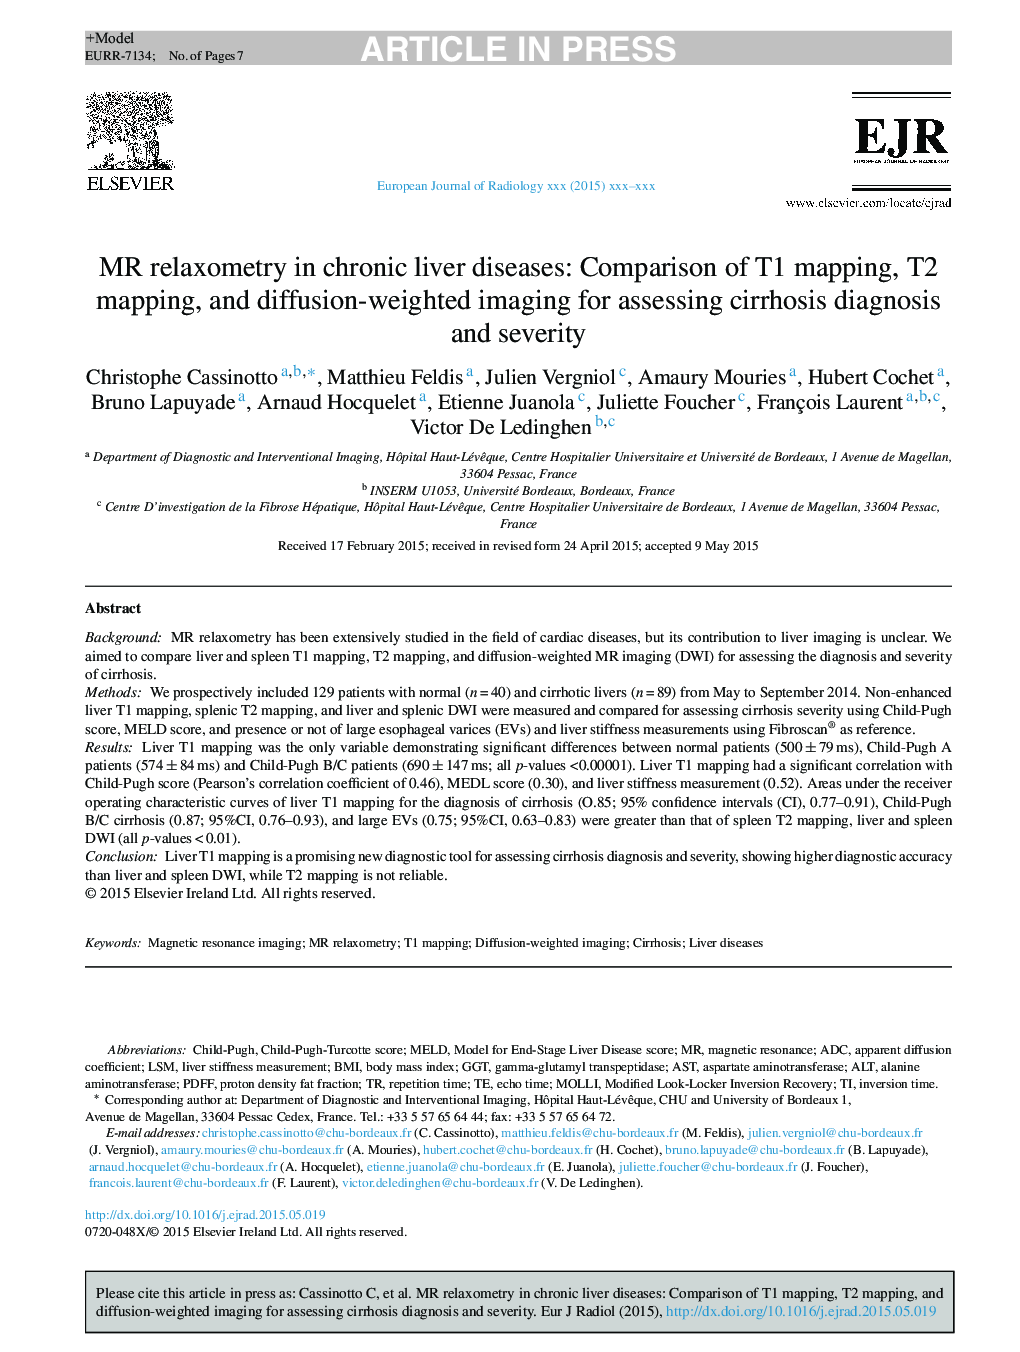 MR relaxometry in chronic liver diseases: Comparison of T1 mapping, T2 mapping, and diffusion-weighted imaging for assessing cirrhosis diagnosis and severity